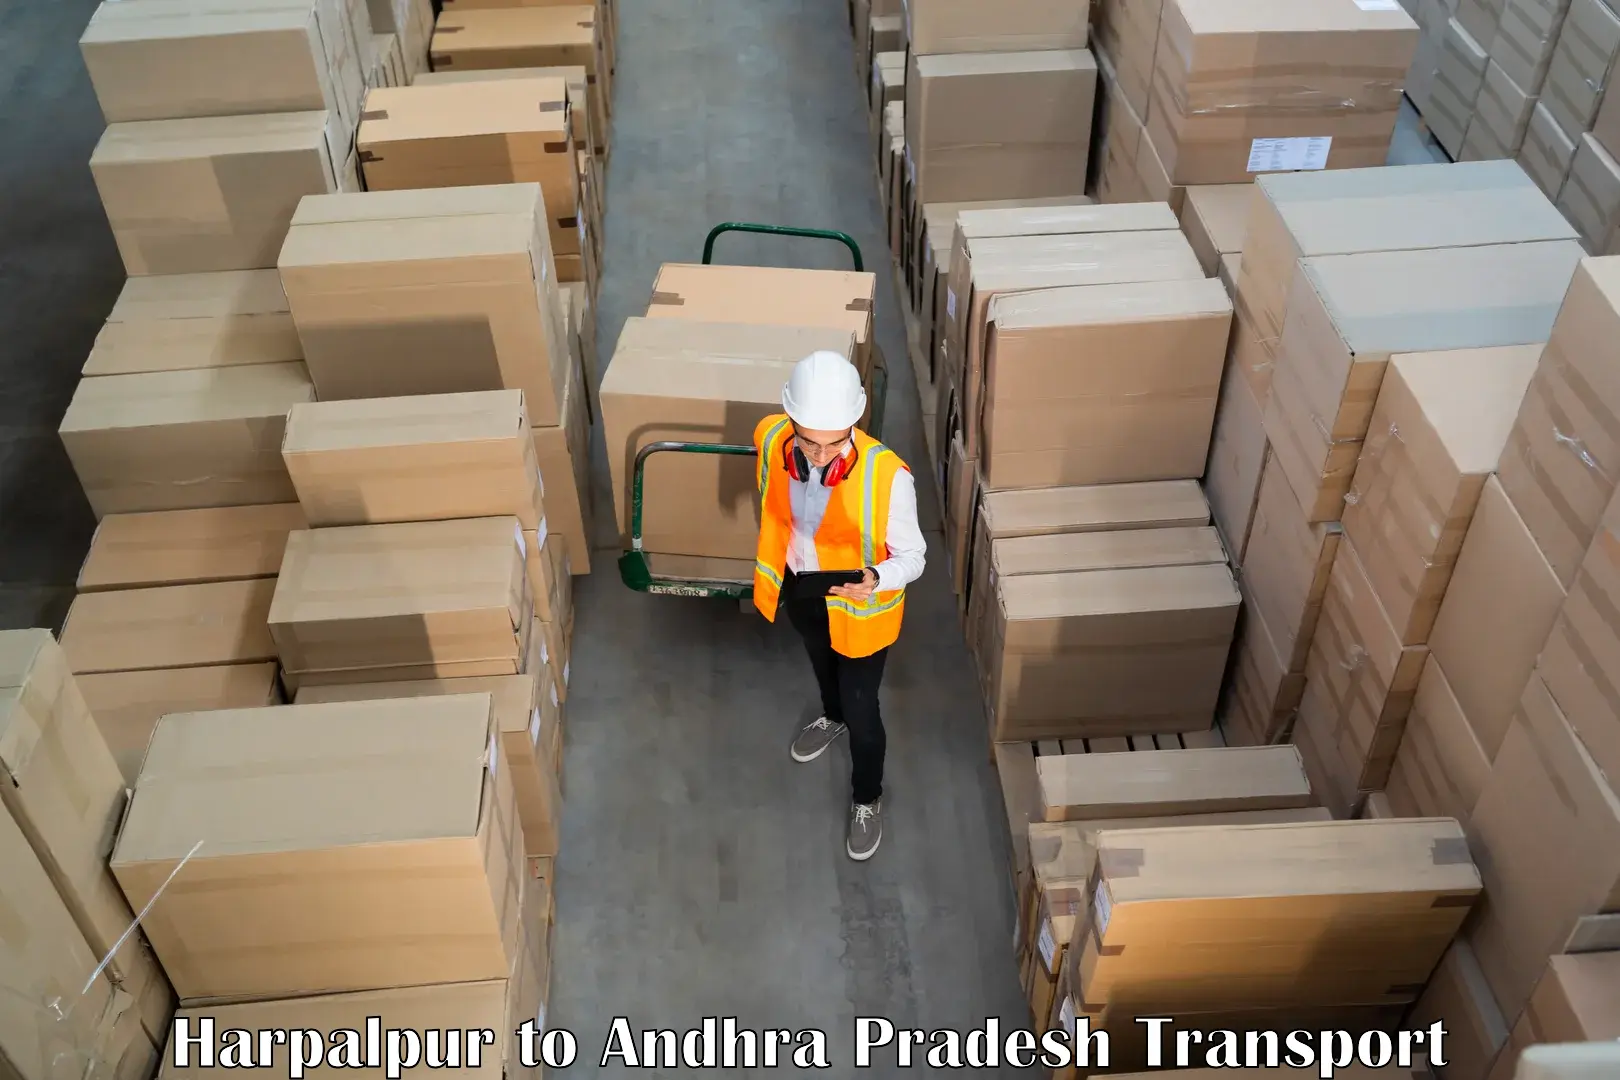 Air freight transport services in Harpalpur to Andhra Pradesh